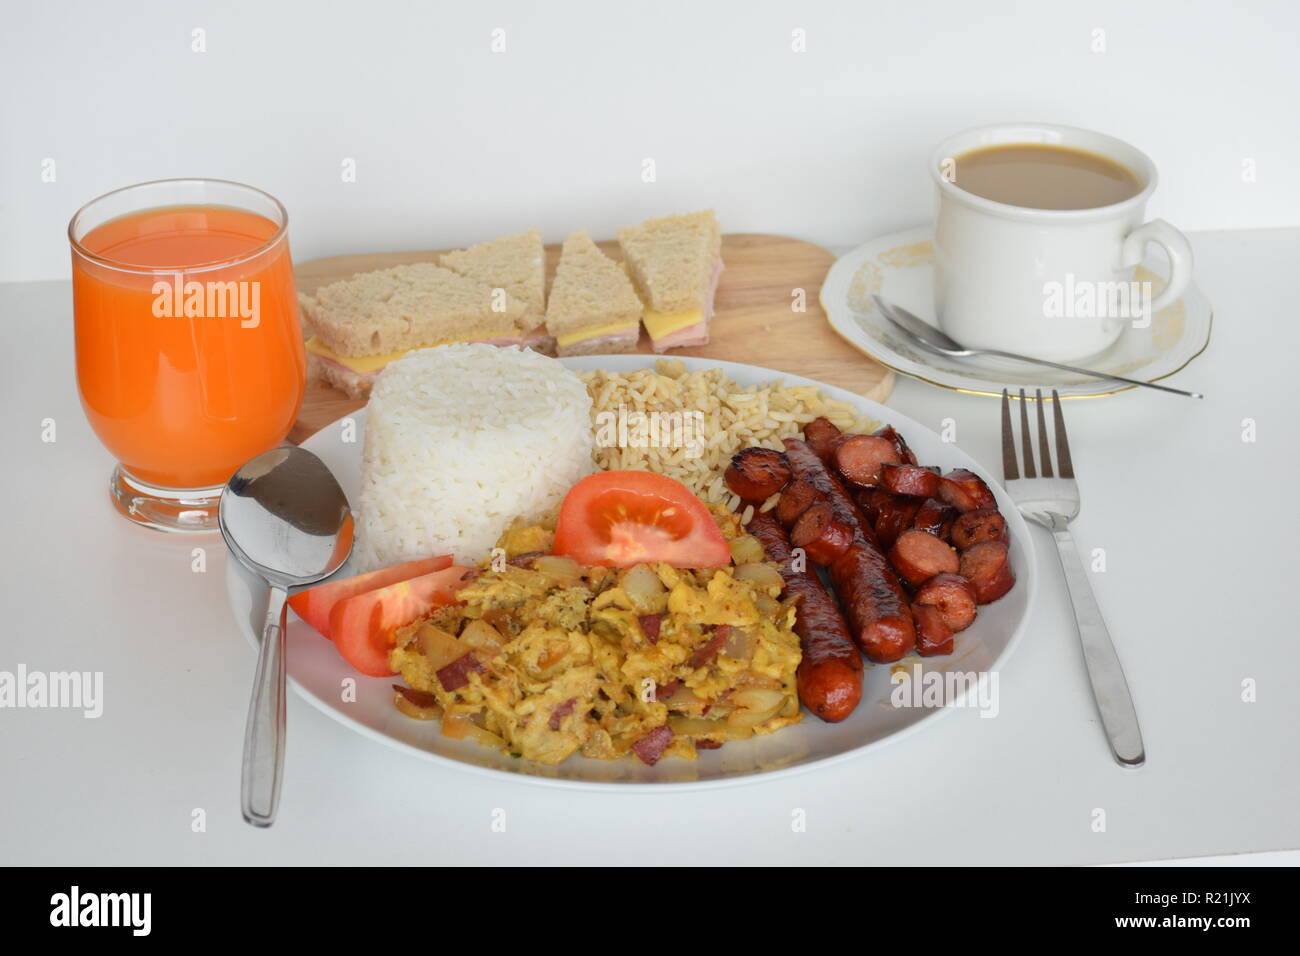 A freshly cooked breakfast of egg, bacon, sausage, tomatoes and rice at Lety’s Transient Homes Baguio. Ein frisch zubereitetes Frühstück mit Ei, Speck Stock Photo